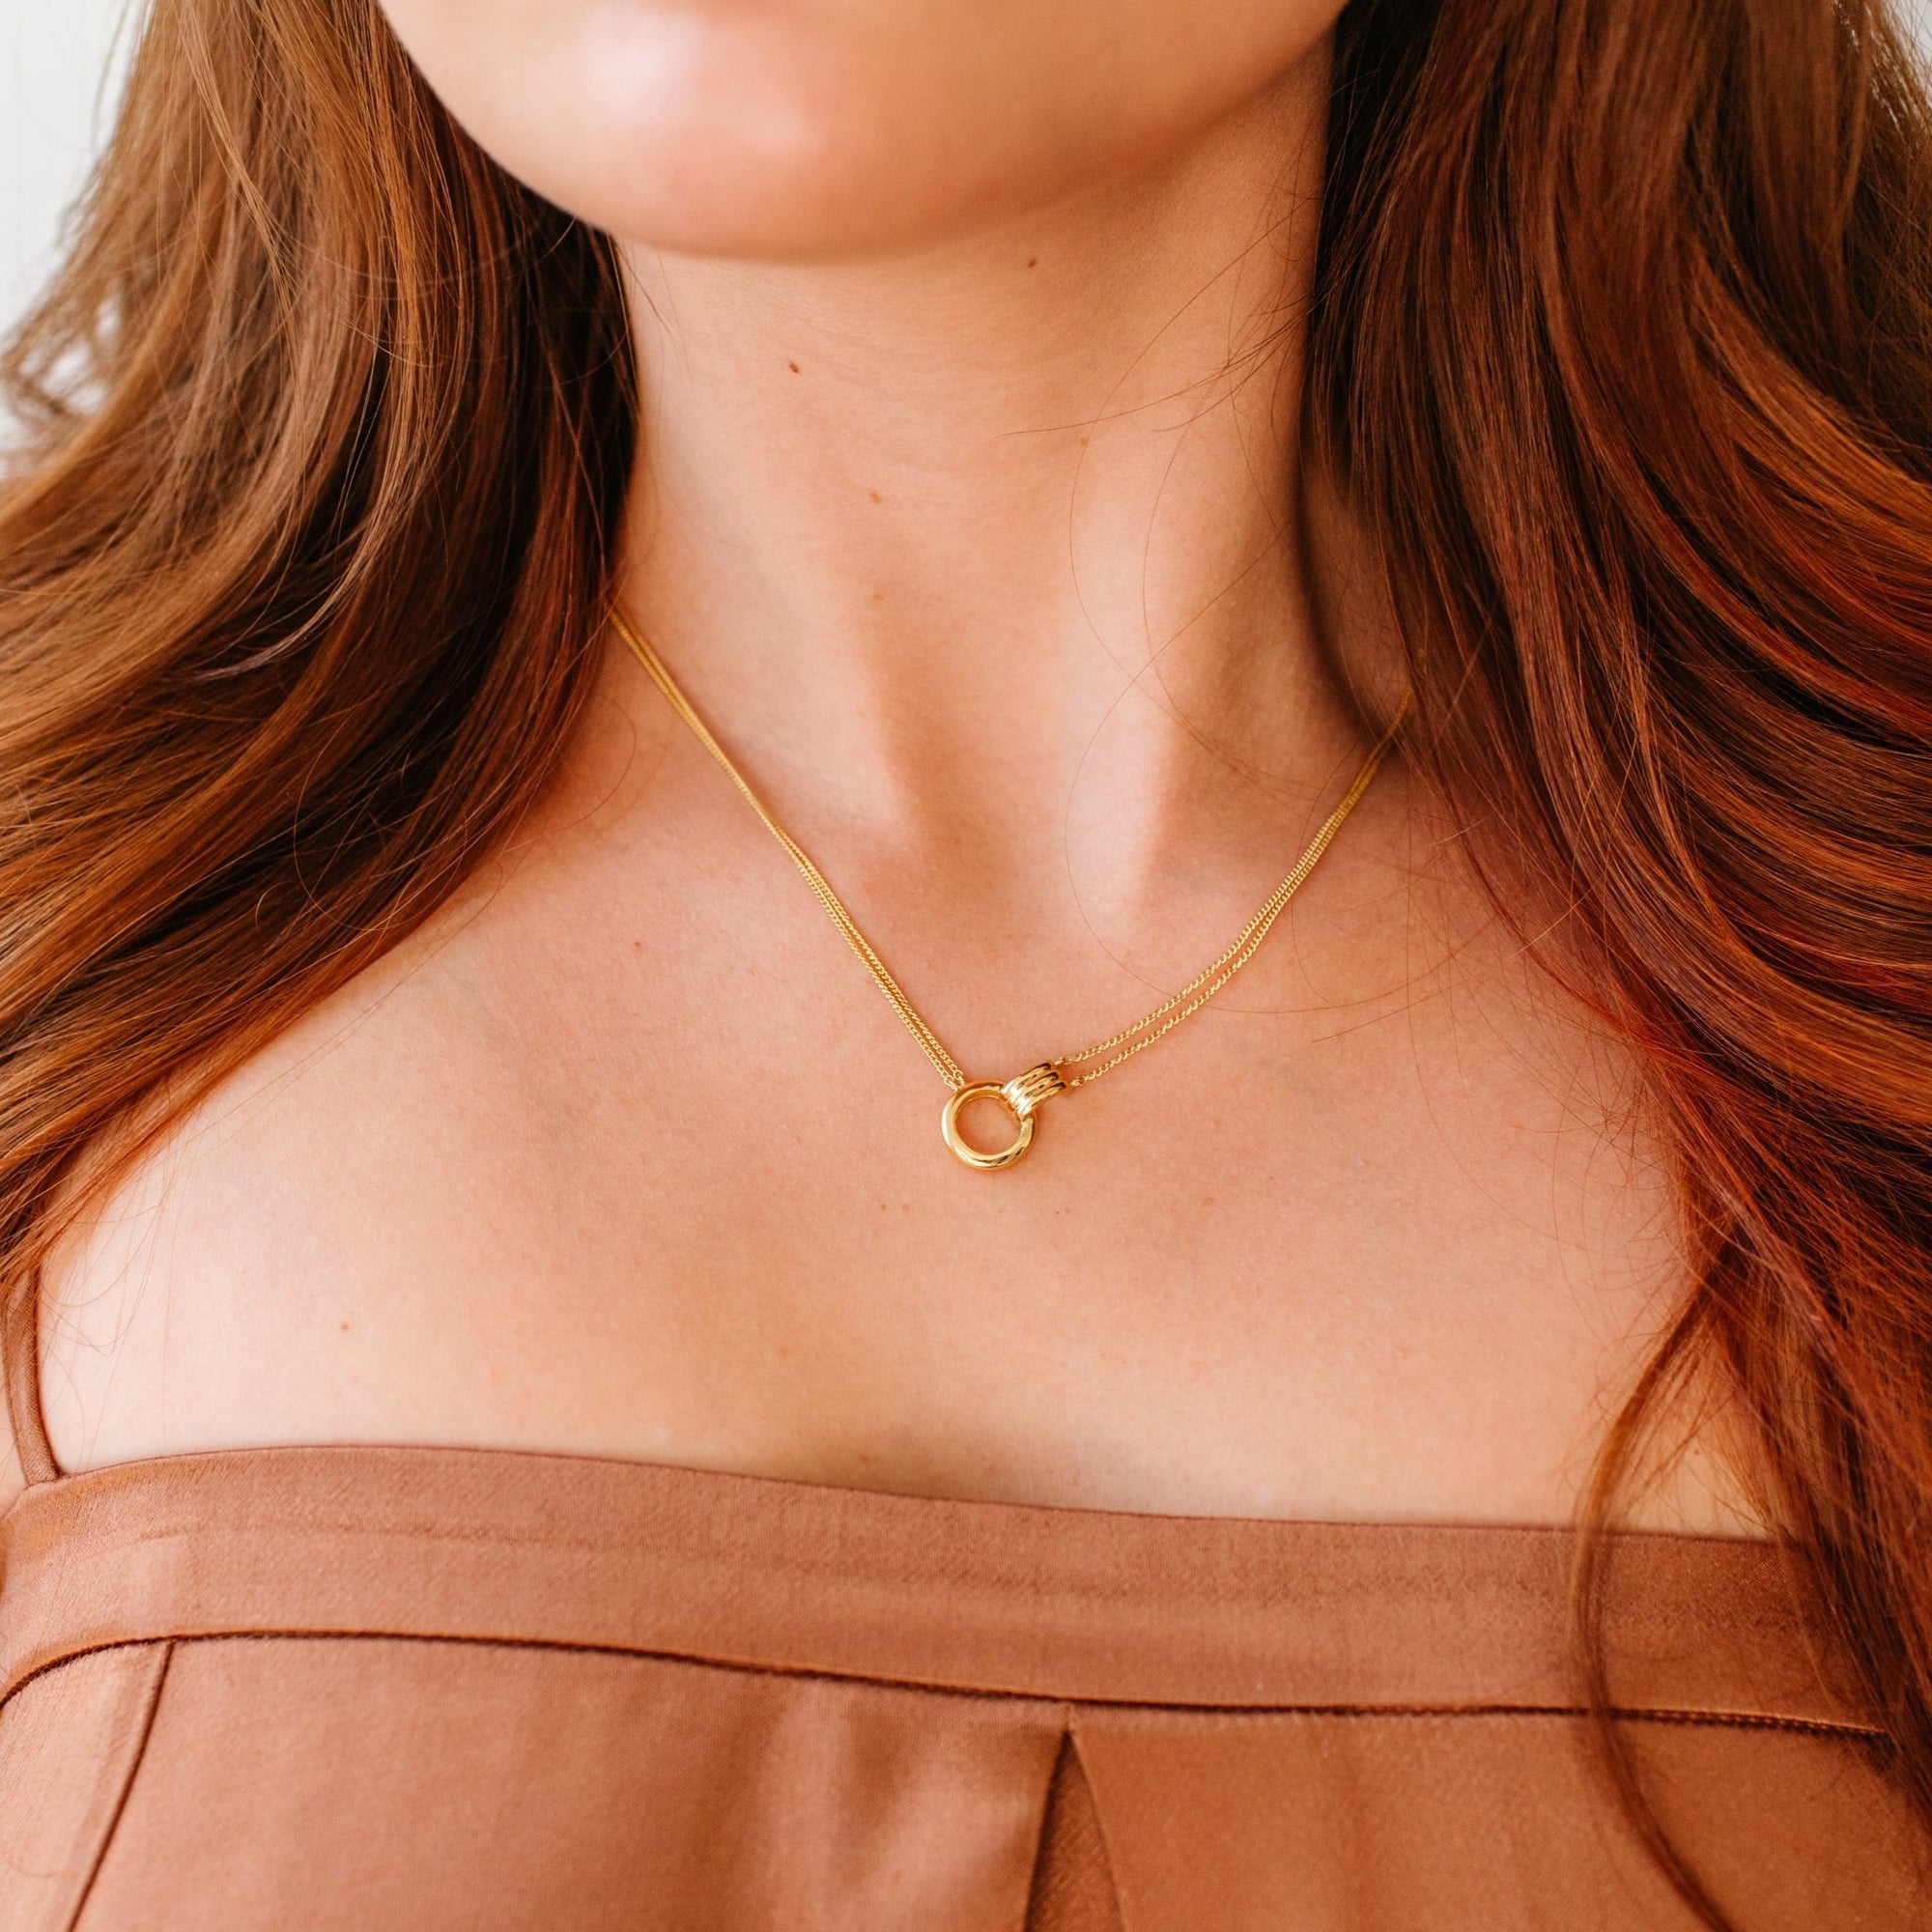 FEARLESS ARC NECKLACE - GOLD - SO PRETTY CARA COTTER